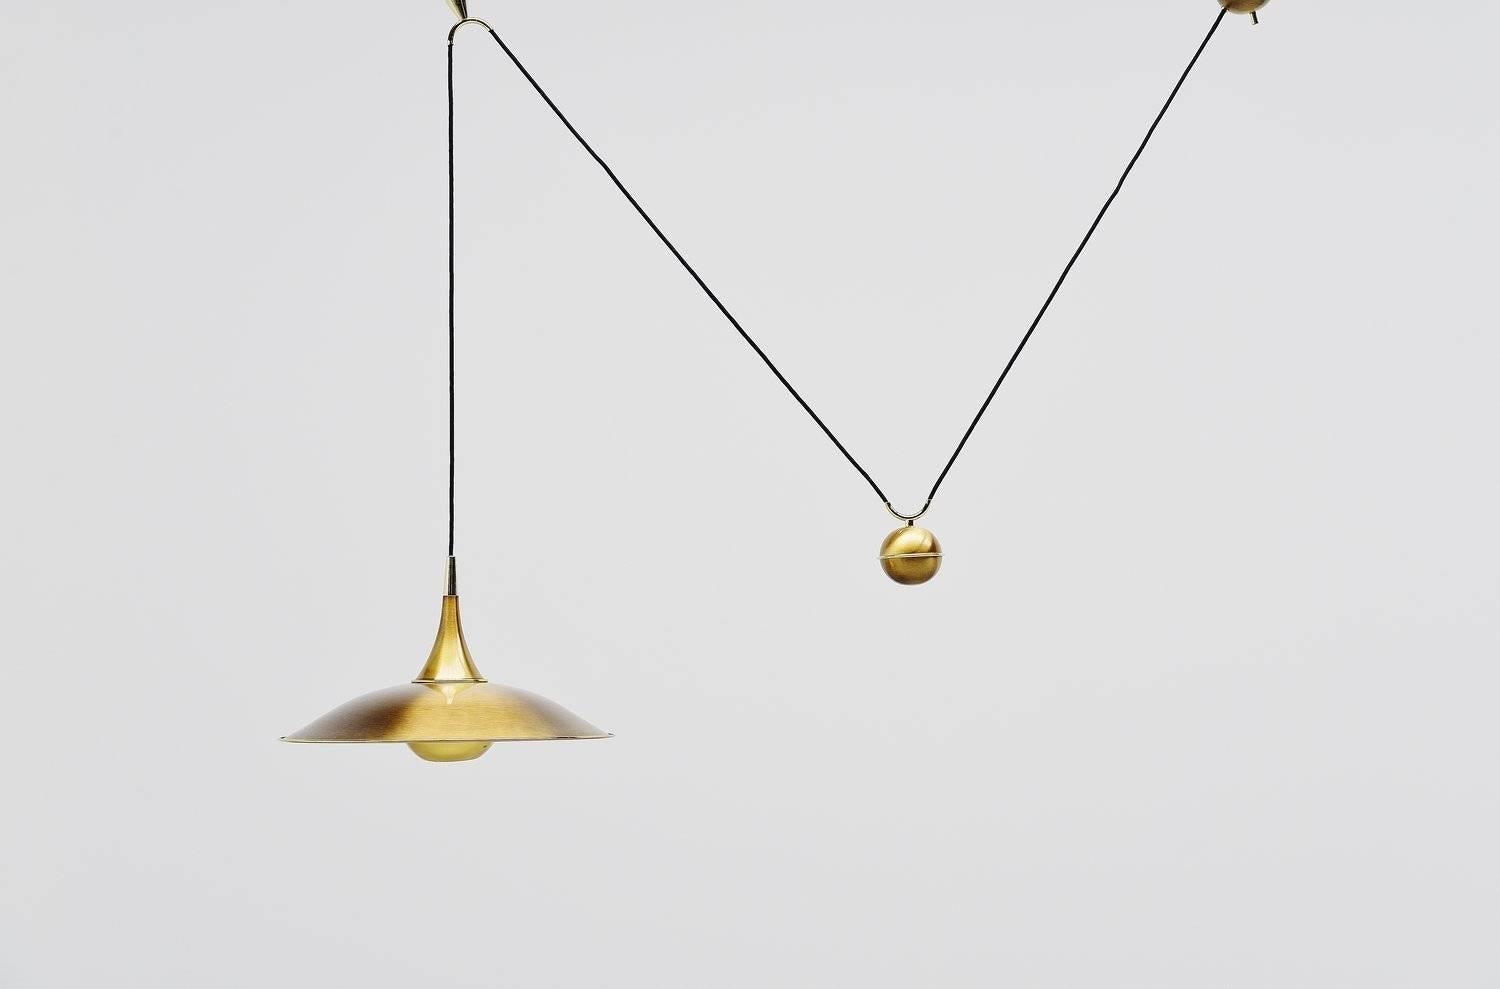 Very nice adjustable ceiling pendant designed by Florian Schulz, Germany, 1970. This lamp has a weighted ball to adjust the height on this (from 80 cm to 140 cm) and you can also choose how wide you want to hang it. It gives very nice diffused light